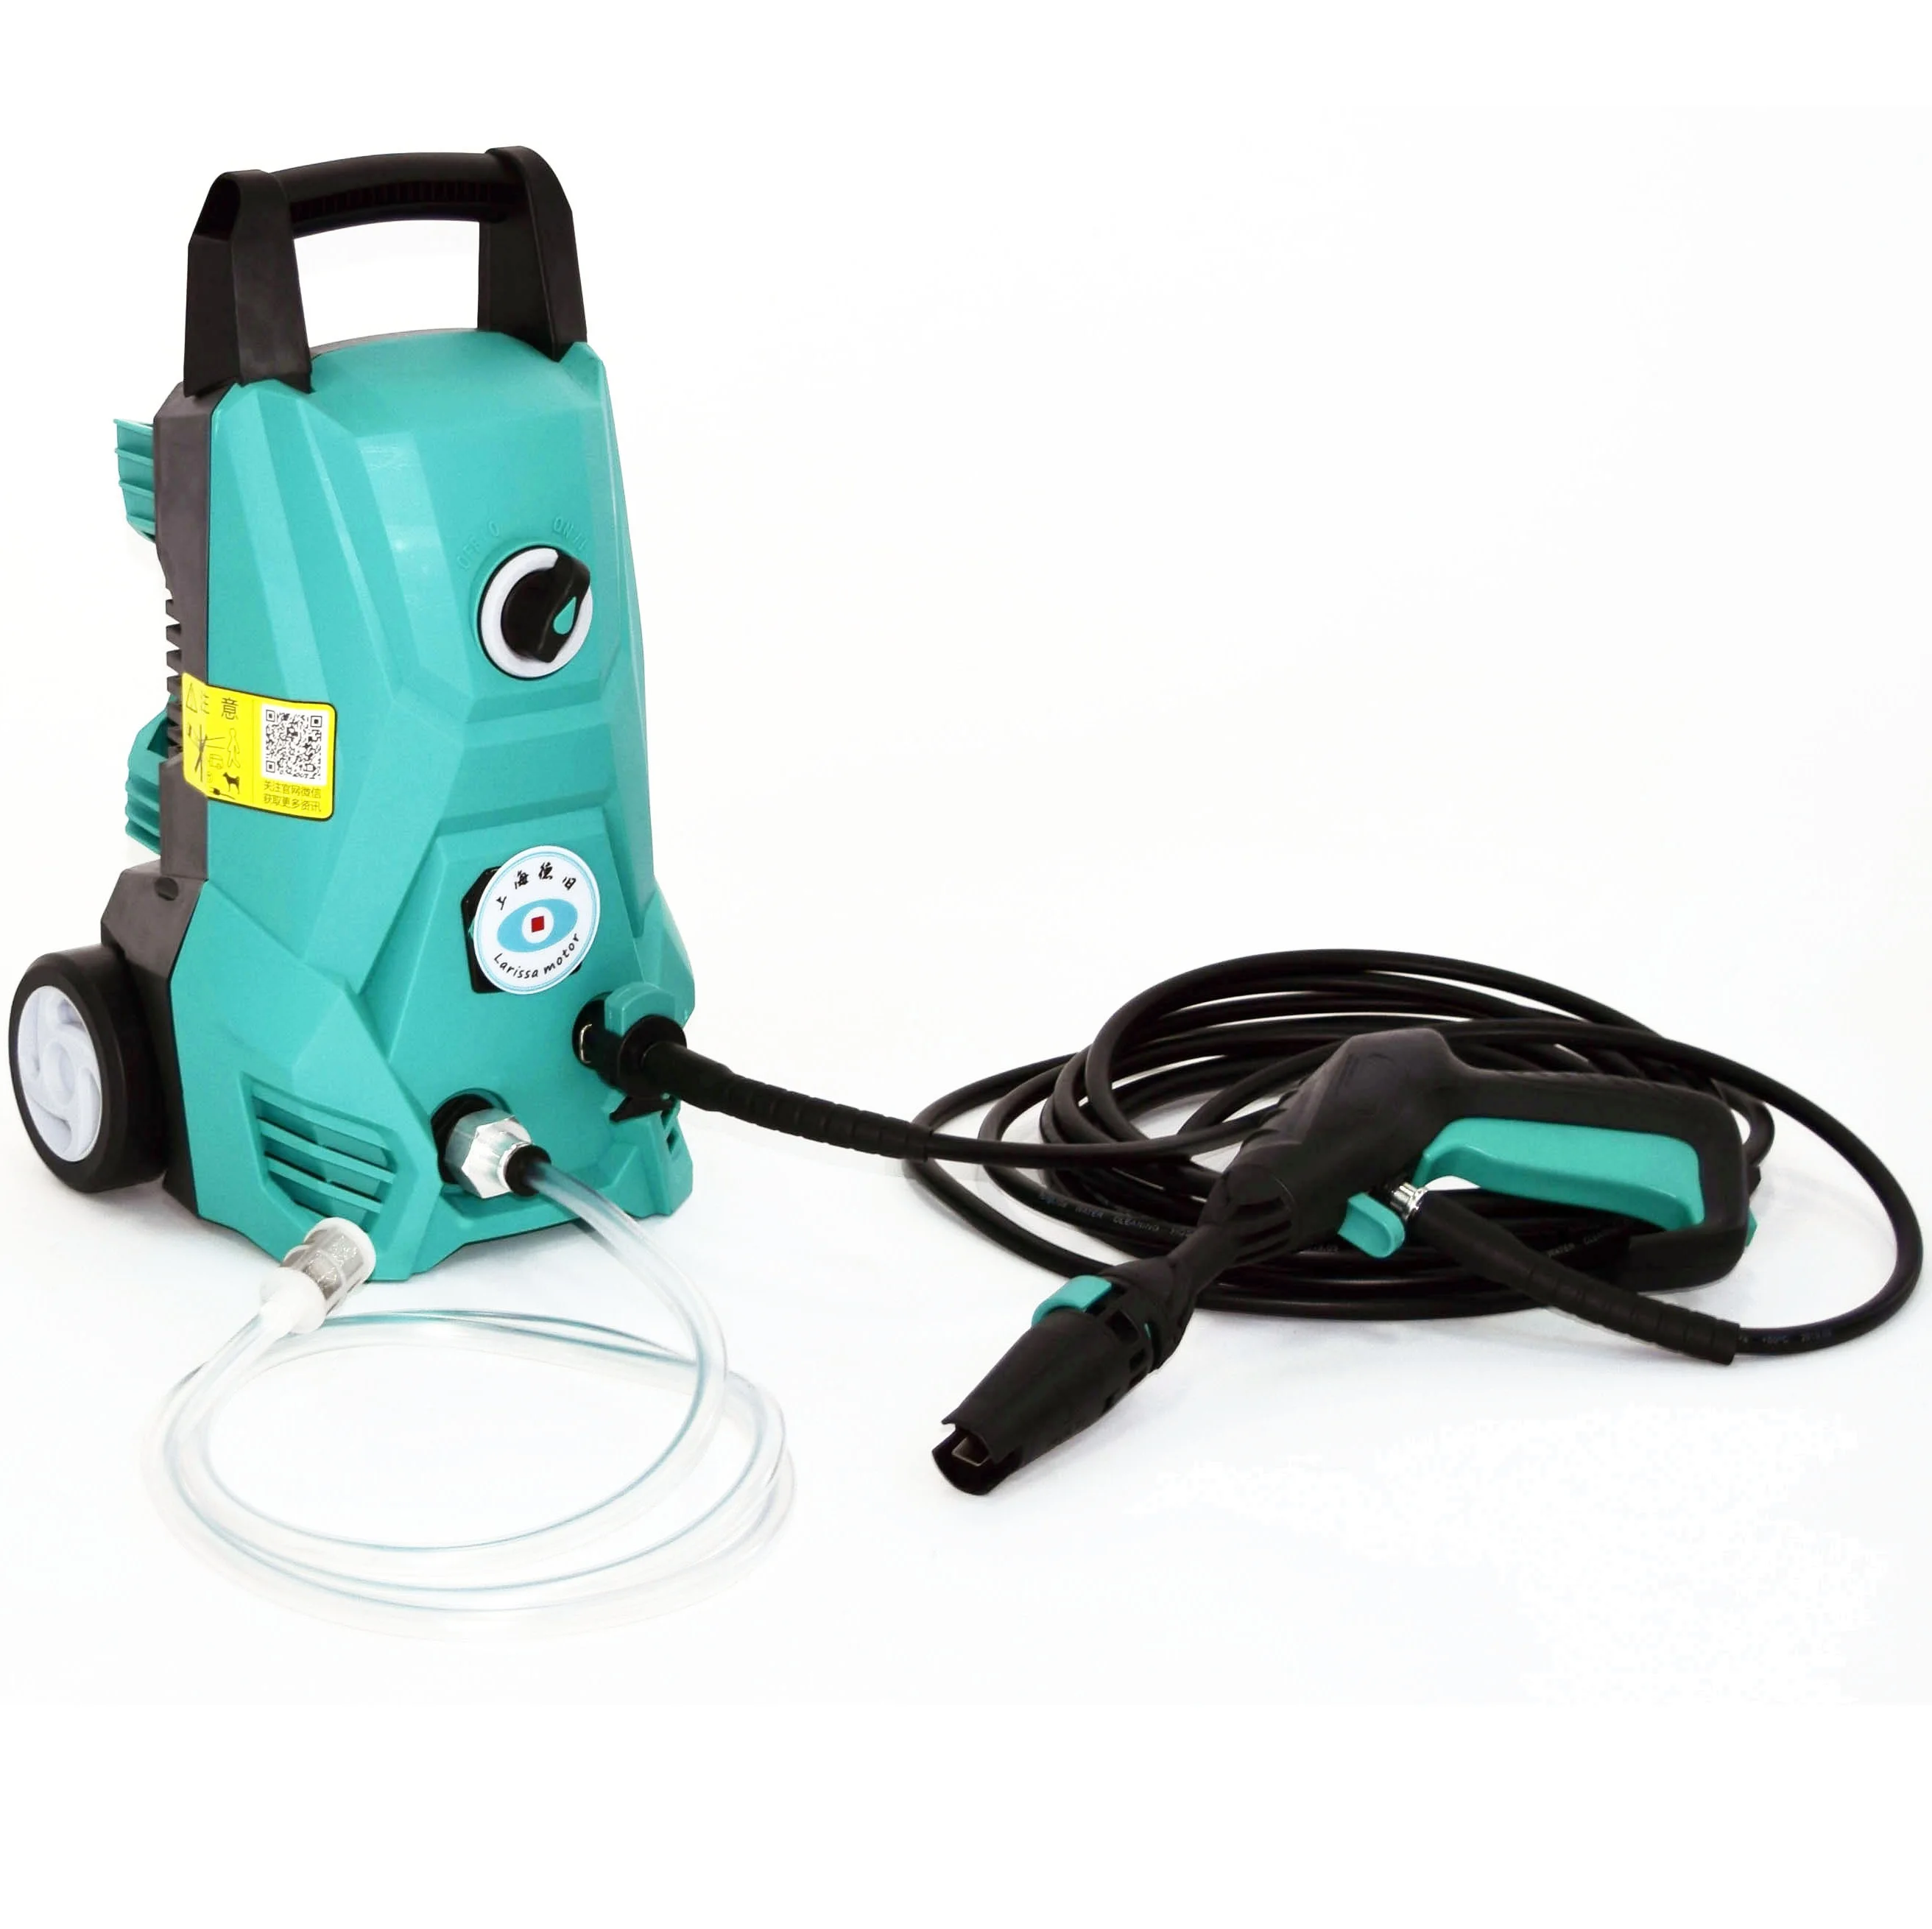 Portable car washer 1600W high pressure cleaner Mini Cleaning Automatic Washing Machine